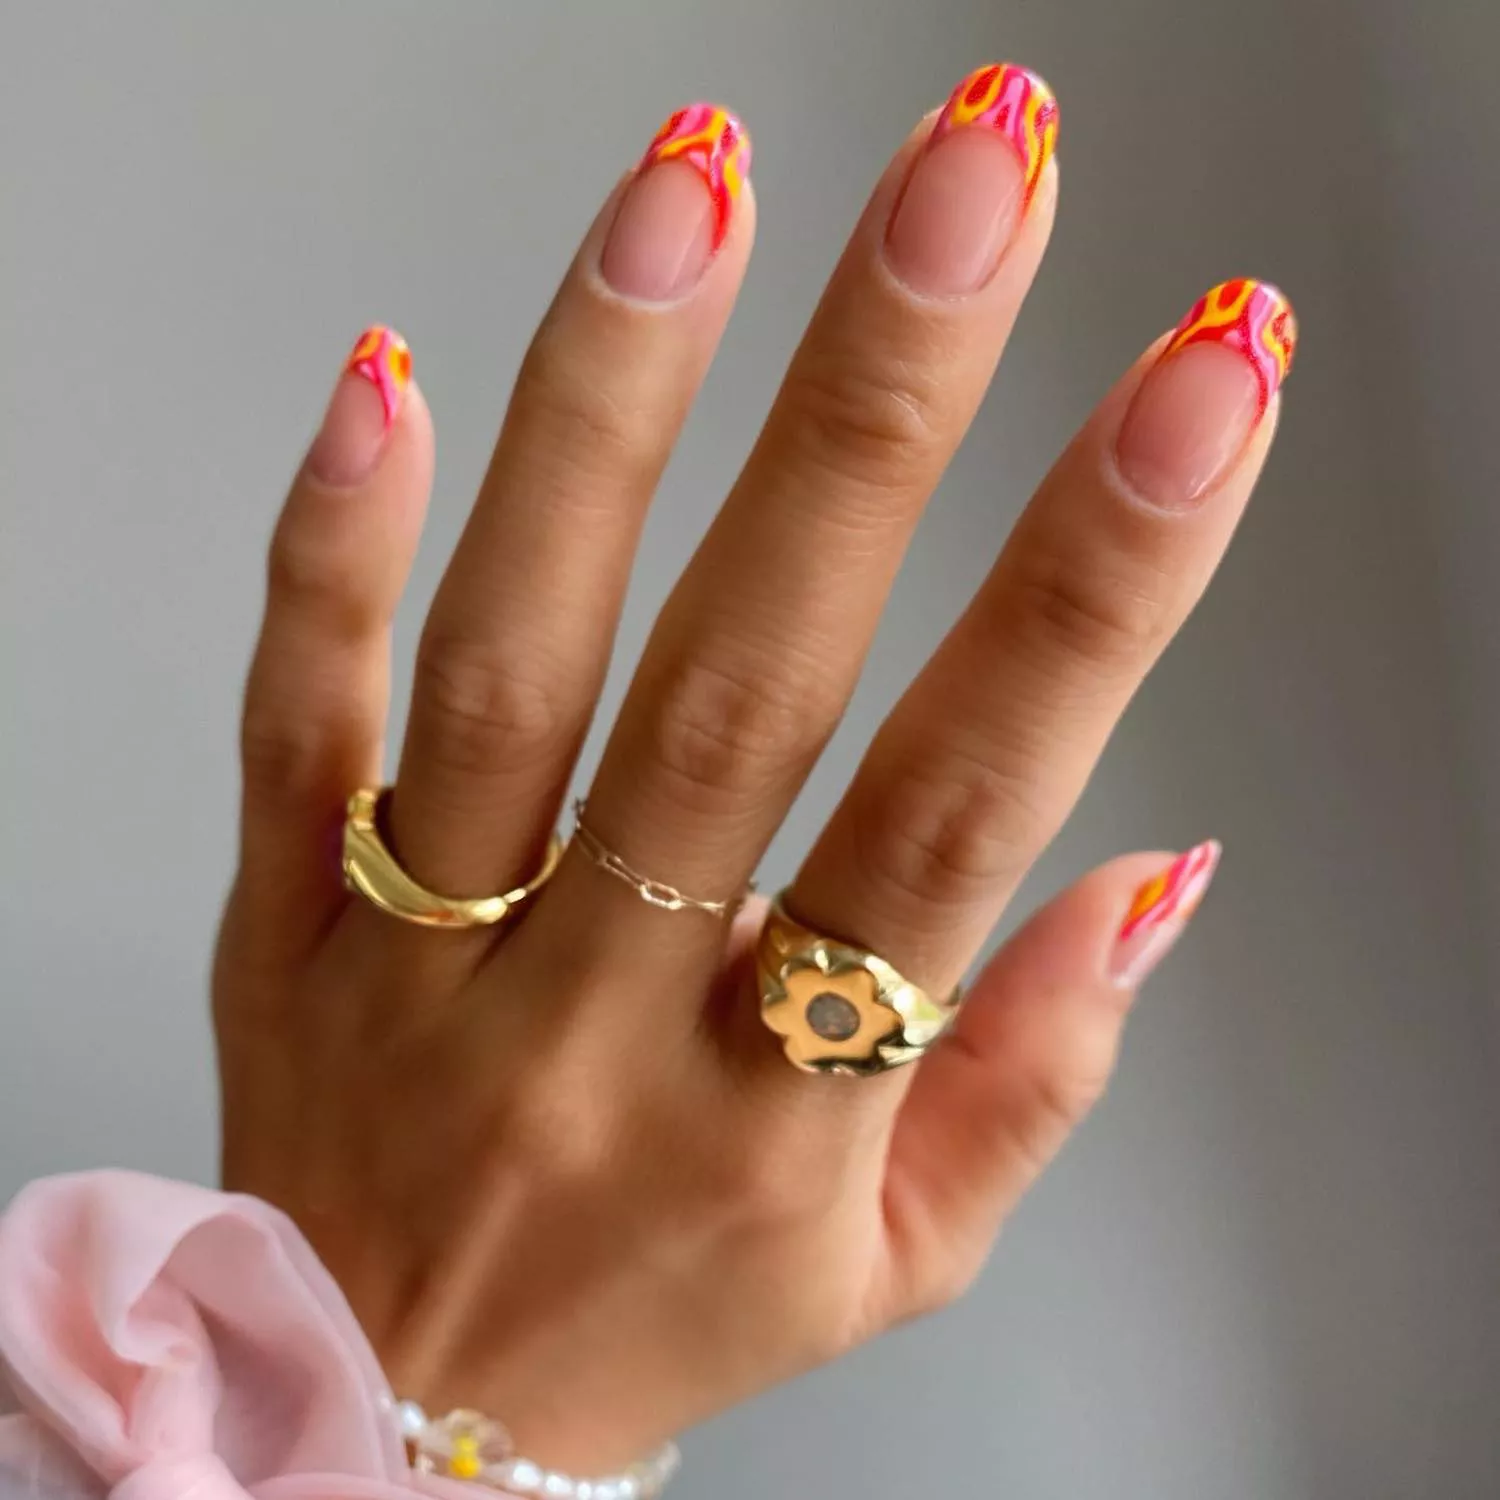 French manicure with pink, red, and yellow wavy tip design